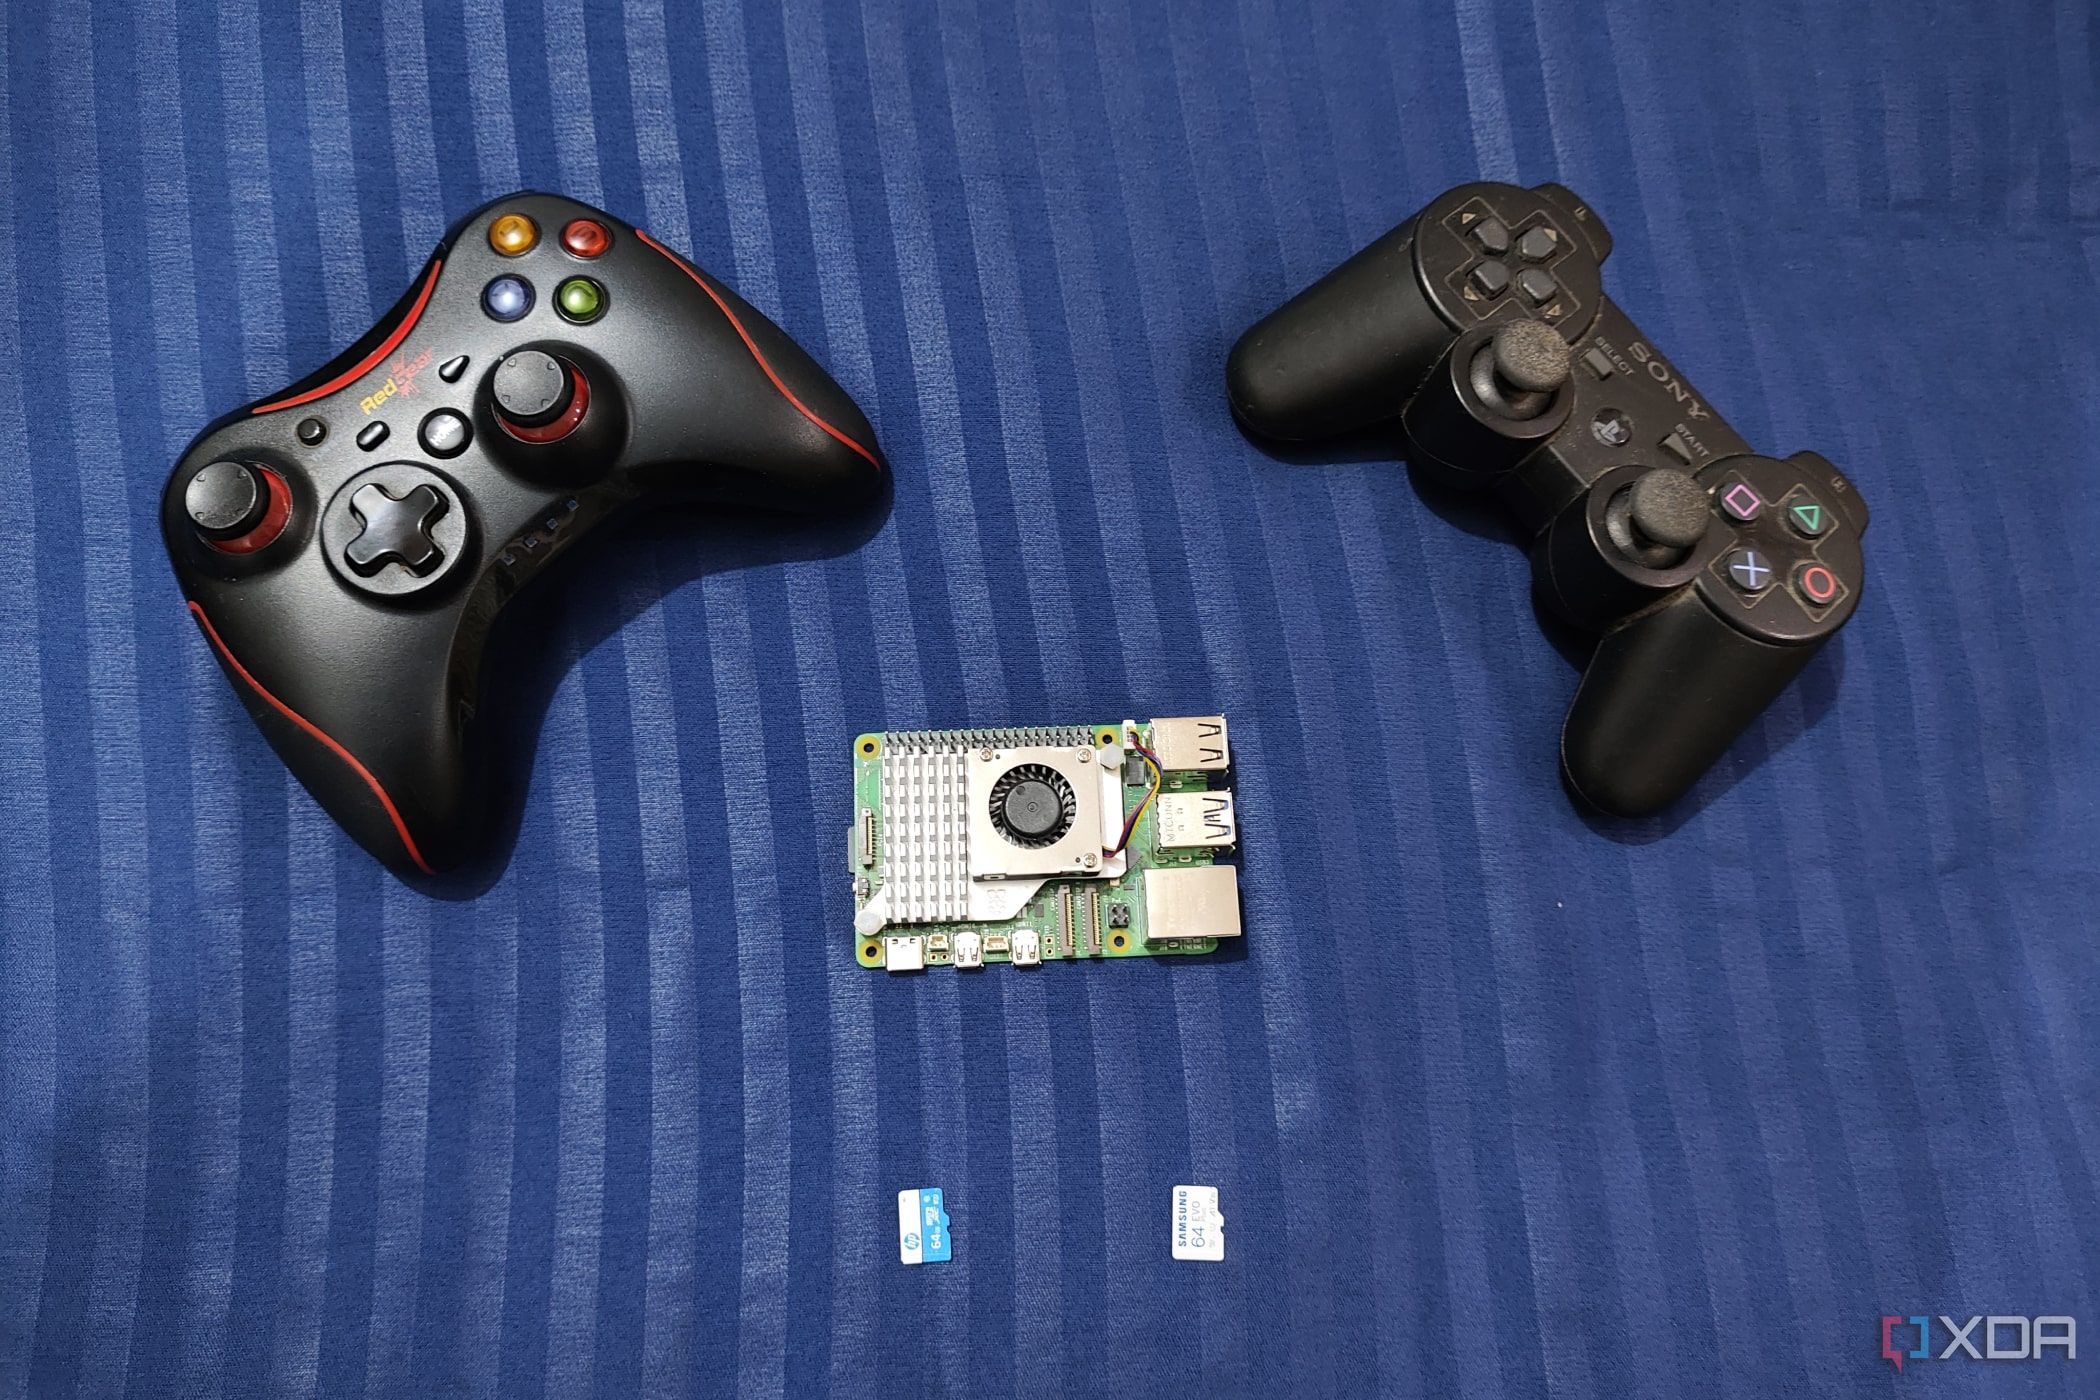 An image of the Raspberry Pi 5 with two controllers and two microSD cards nearby